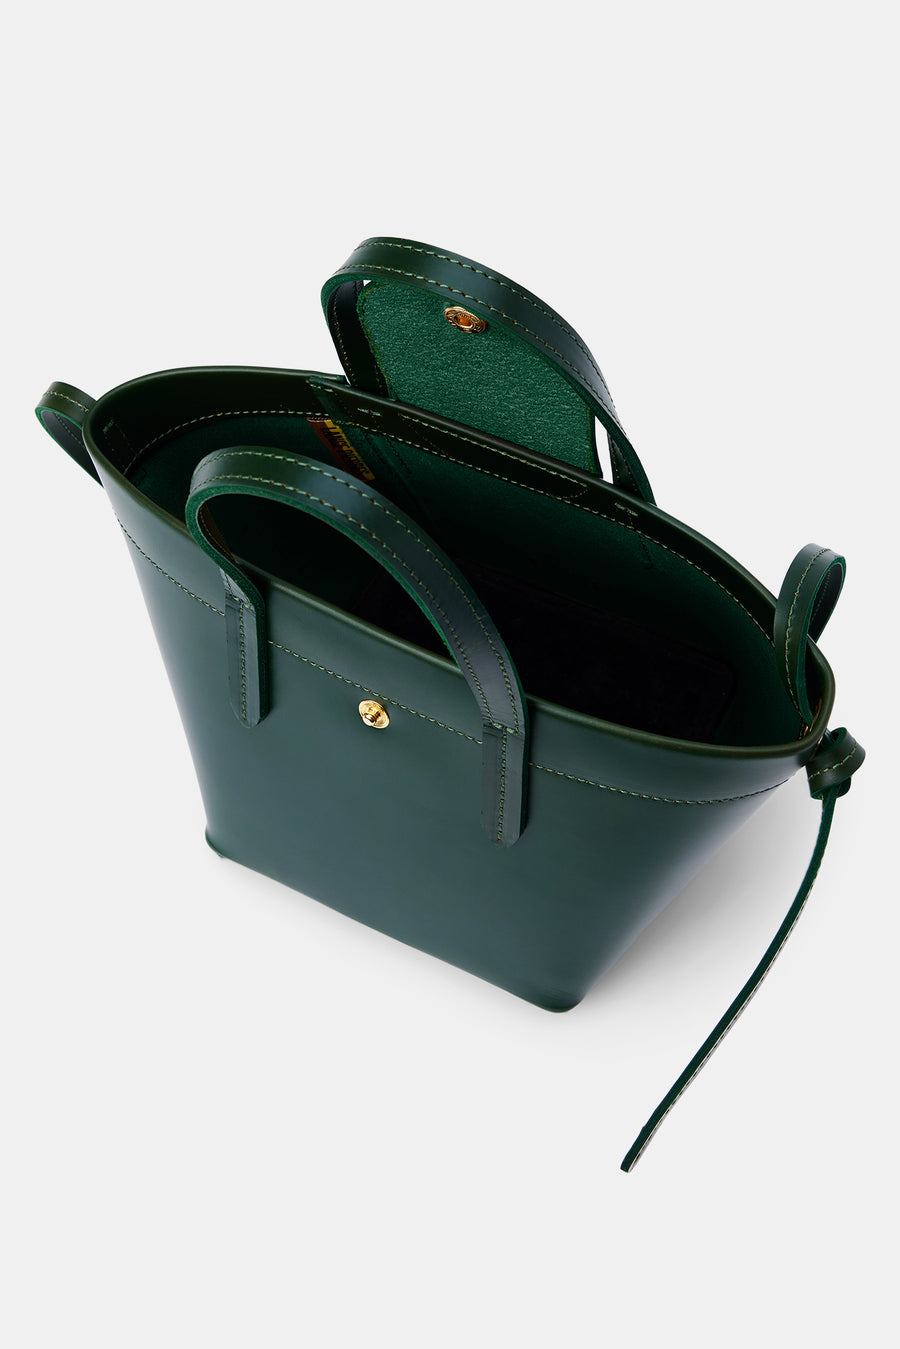 Lance Pierres Miniprism 01 Body Tote - Forest Green